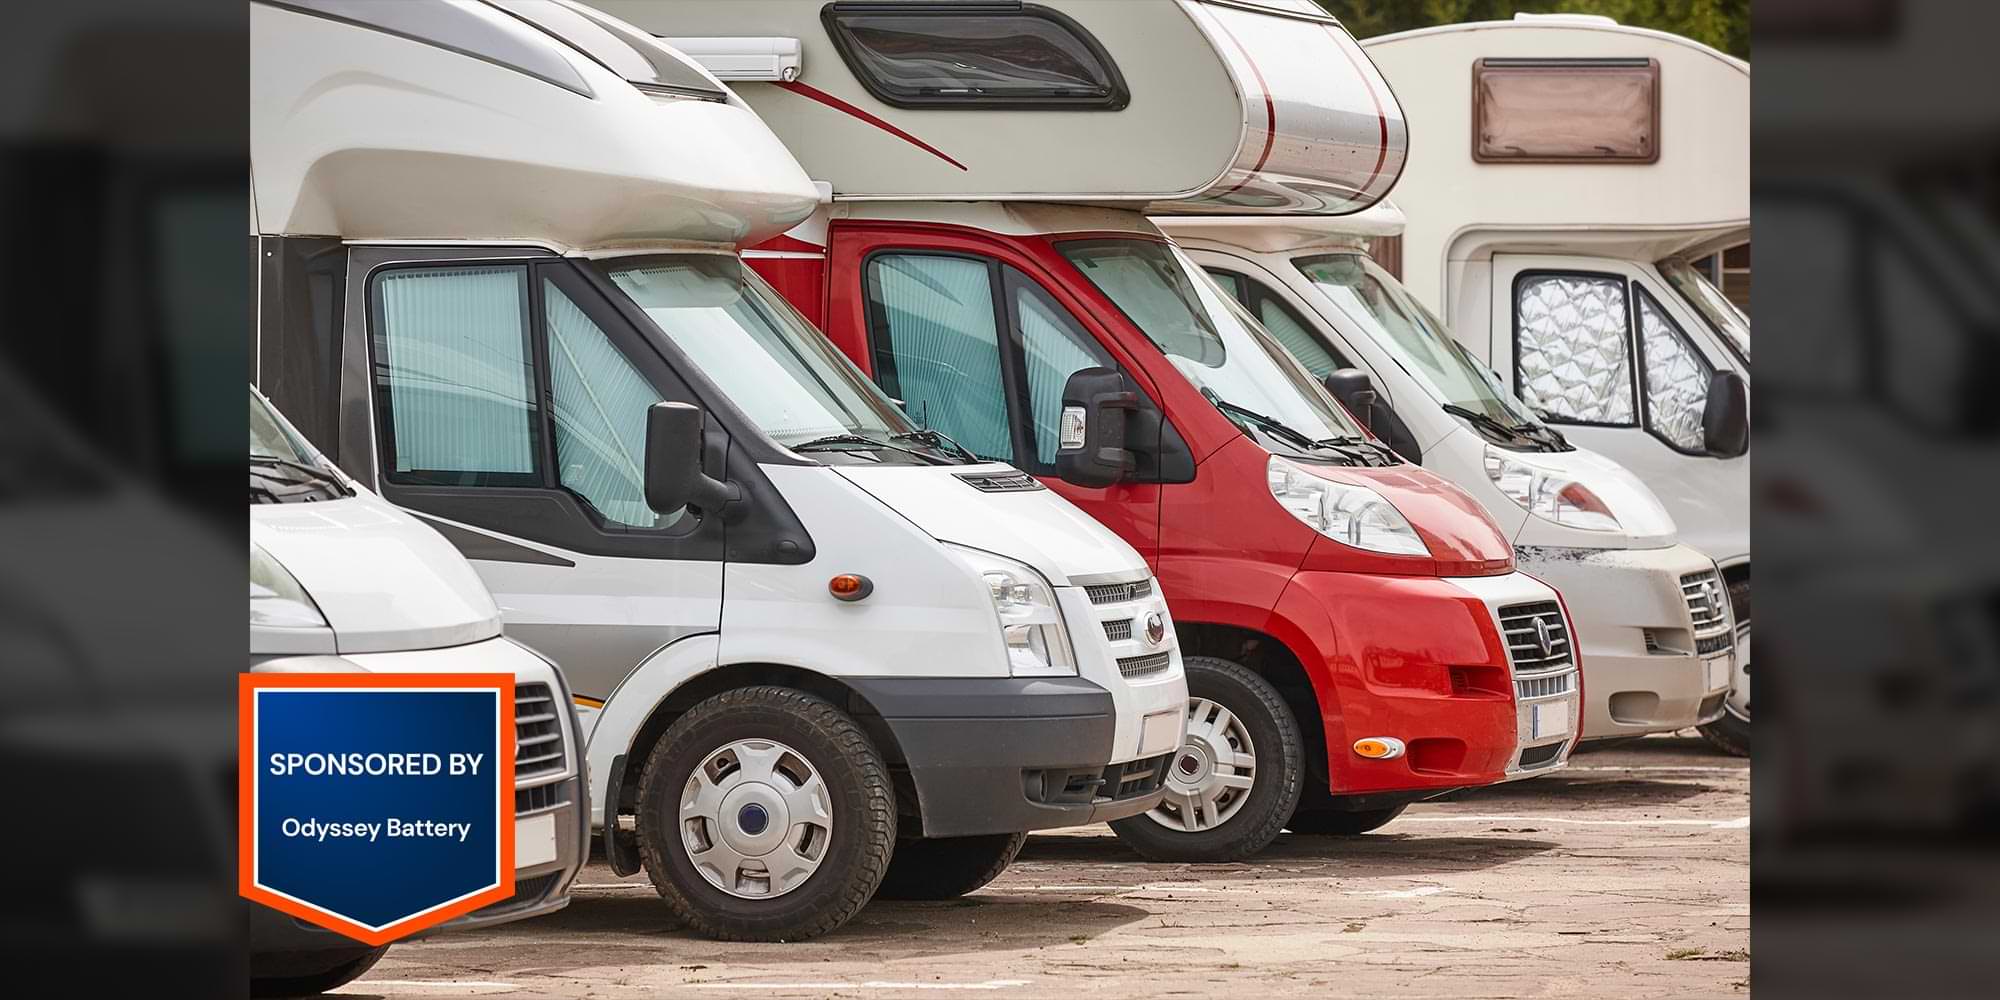 a line of RV van campers parked closely side by side